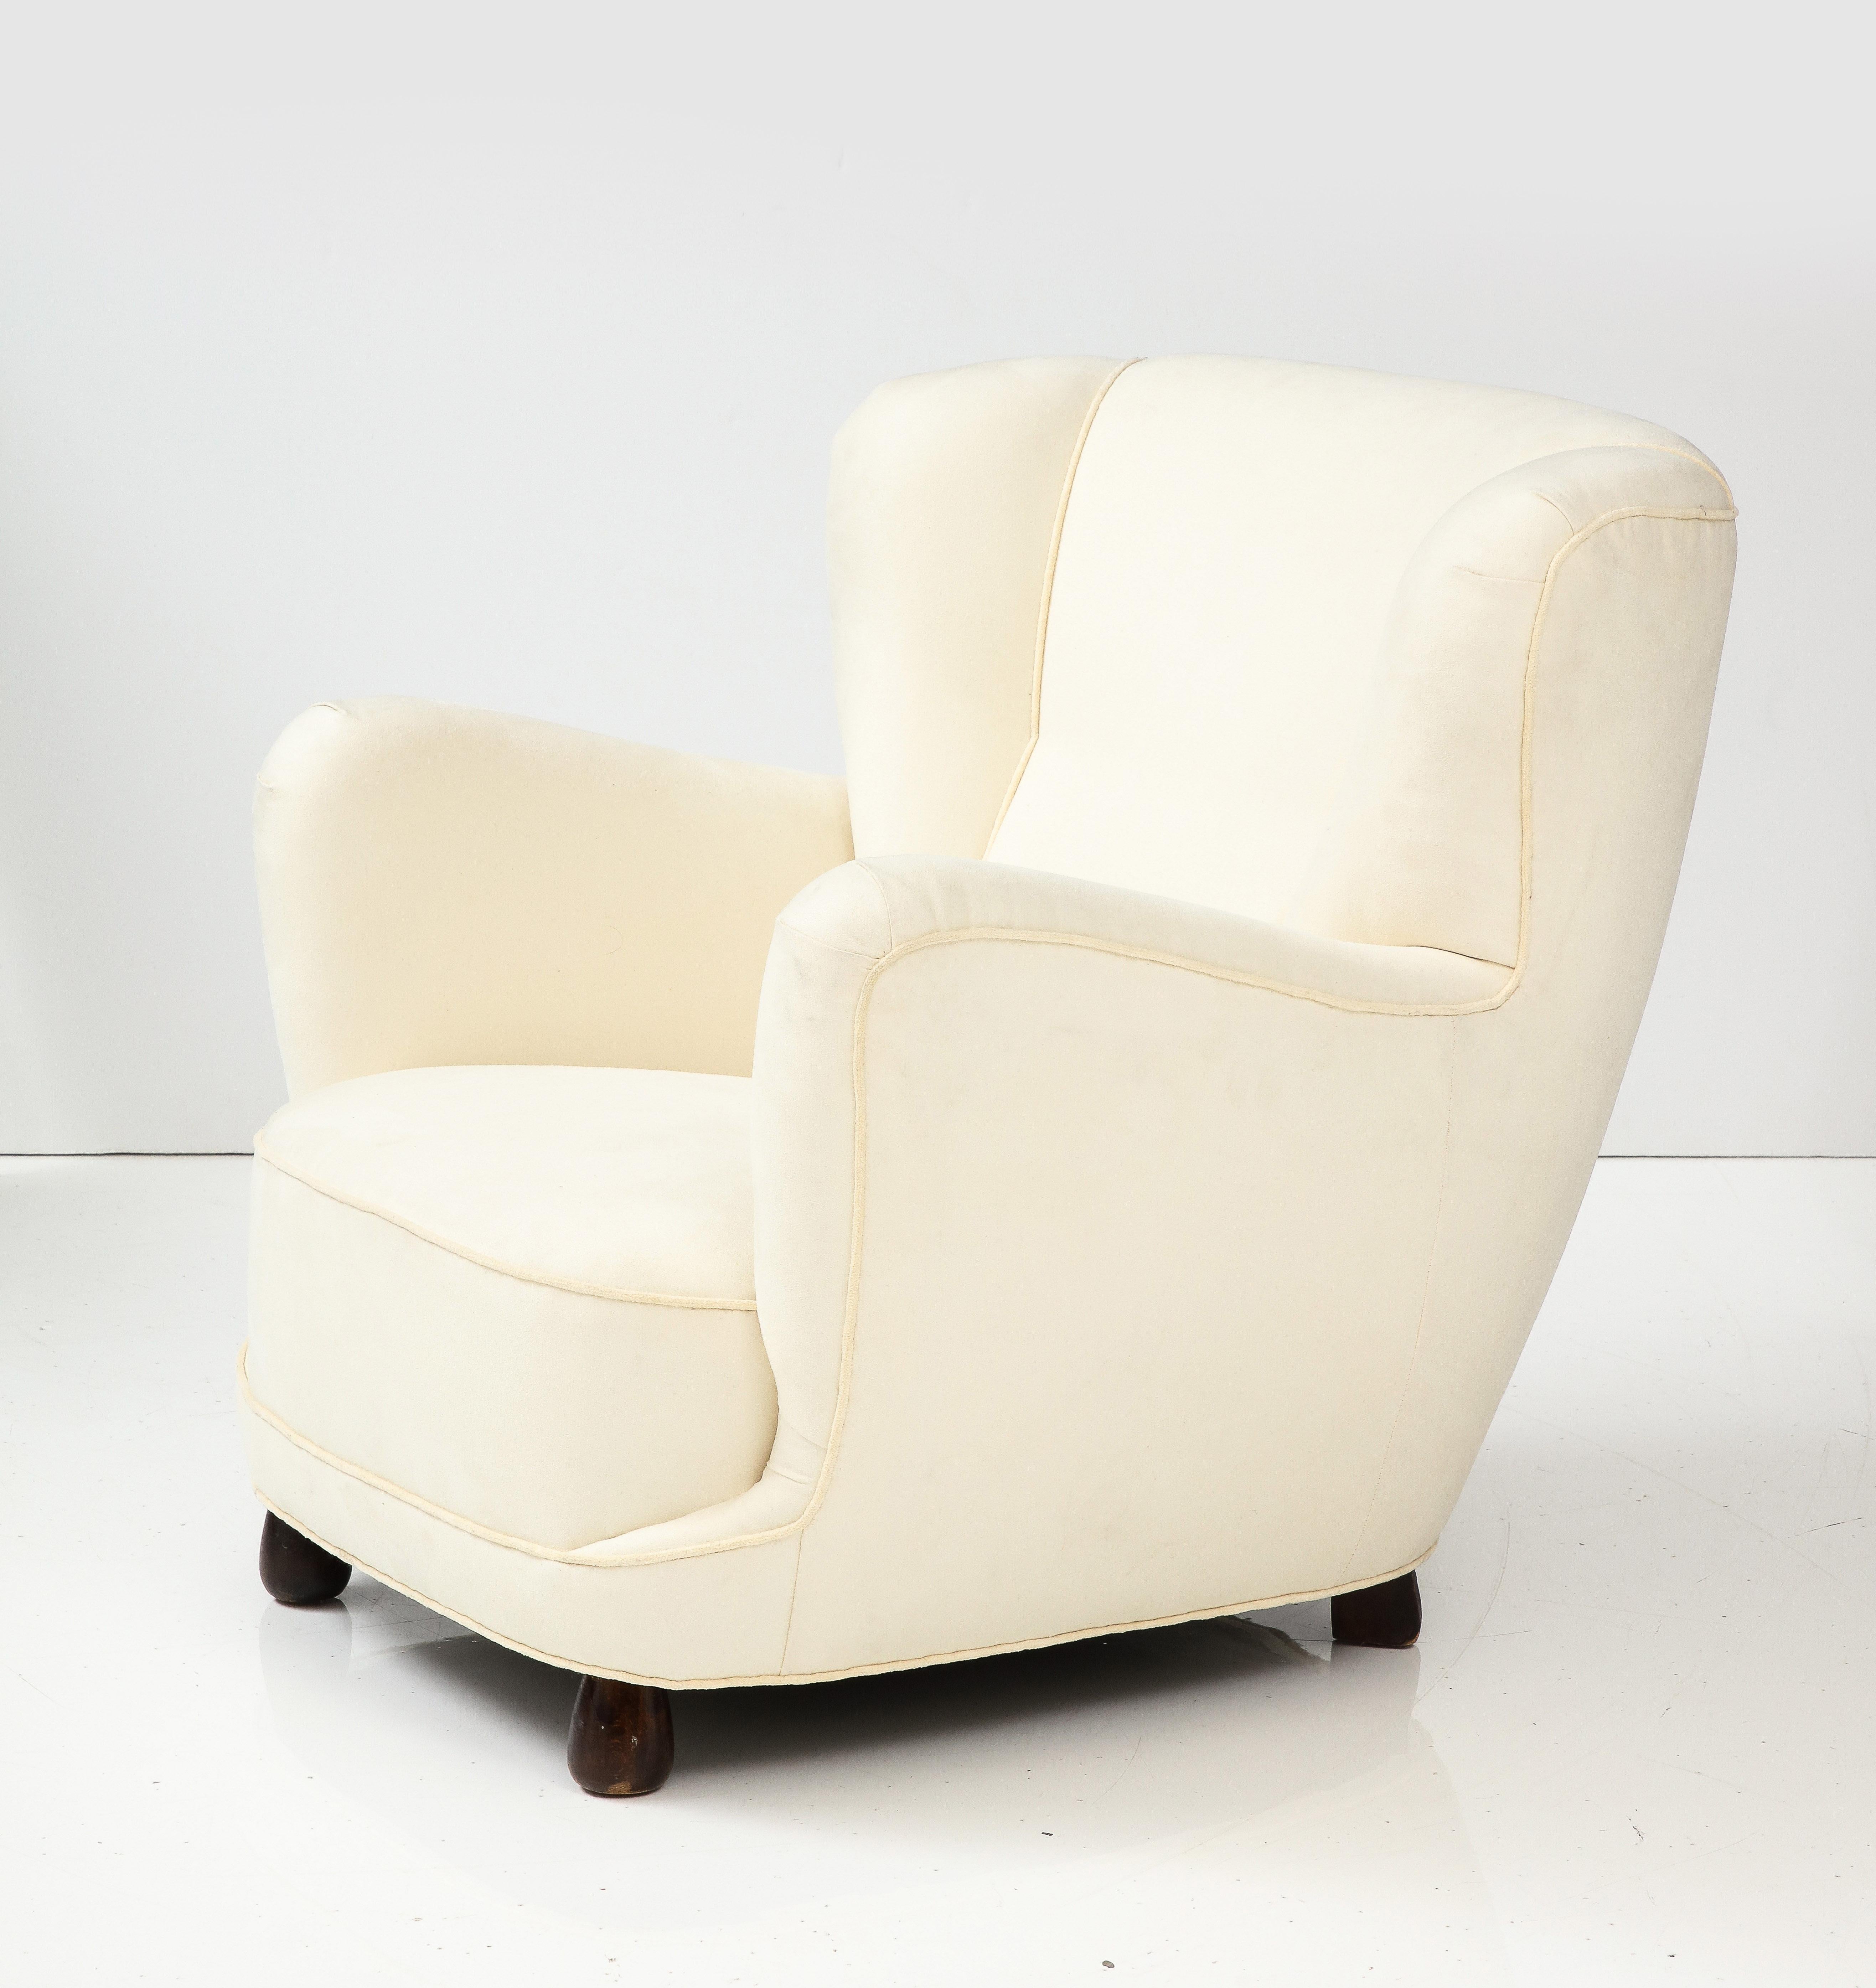 Danish Upholstered Club Chair in Muslin, 1940's For Sale 1